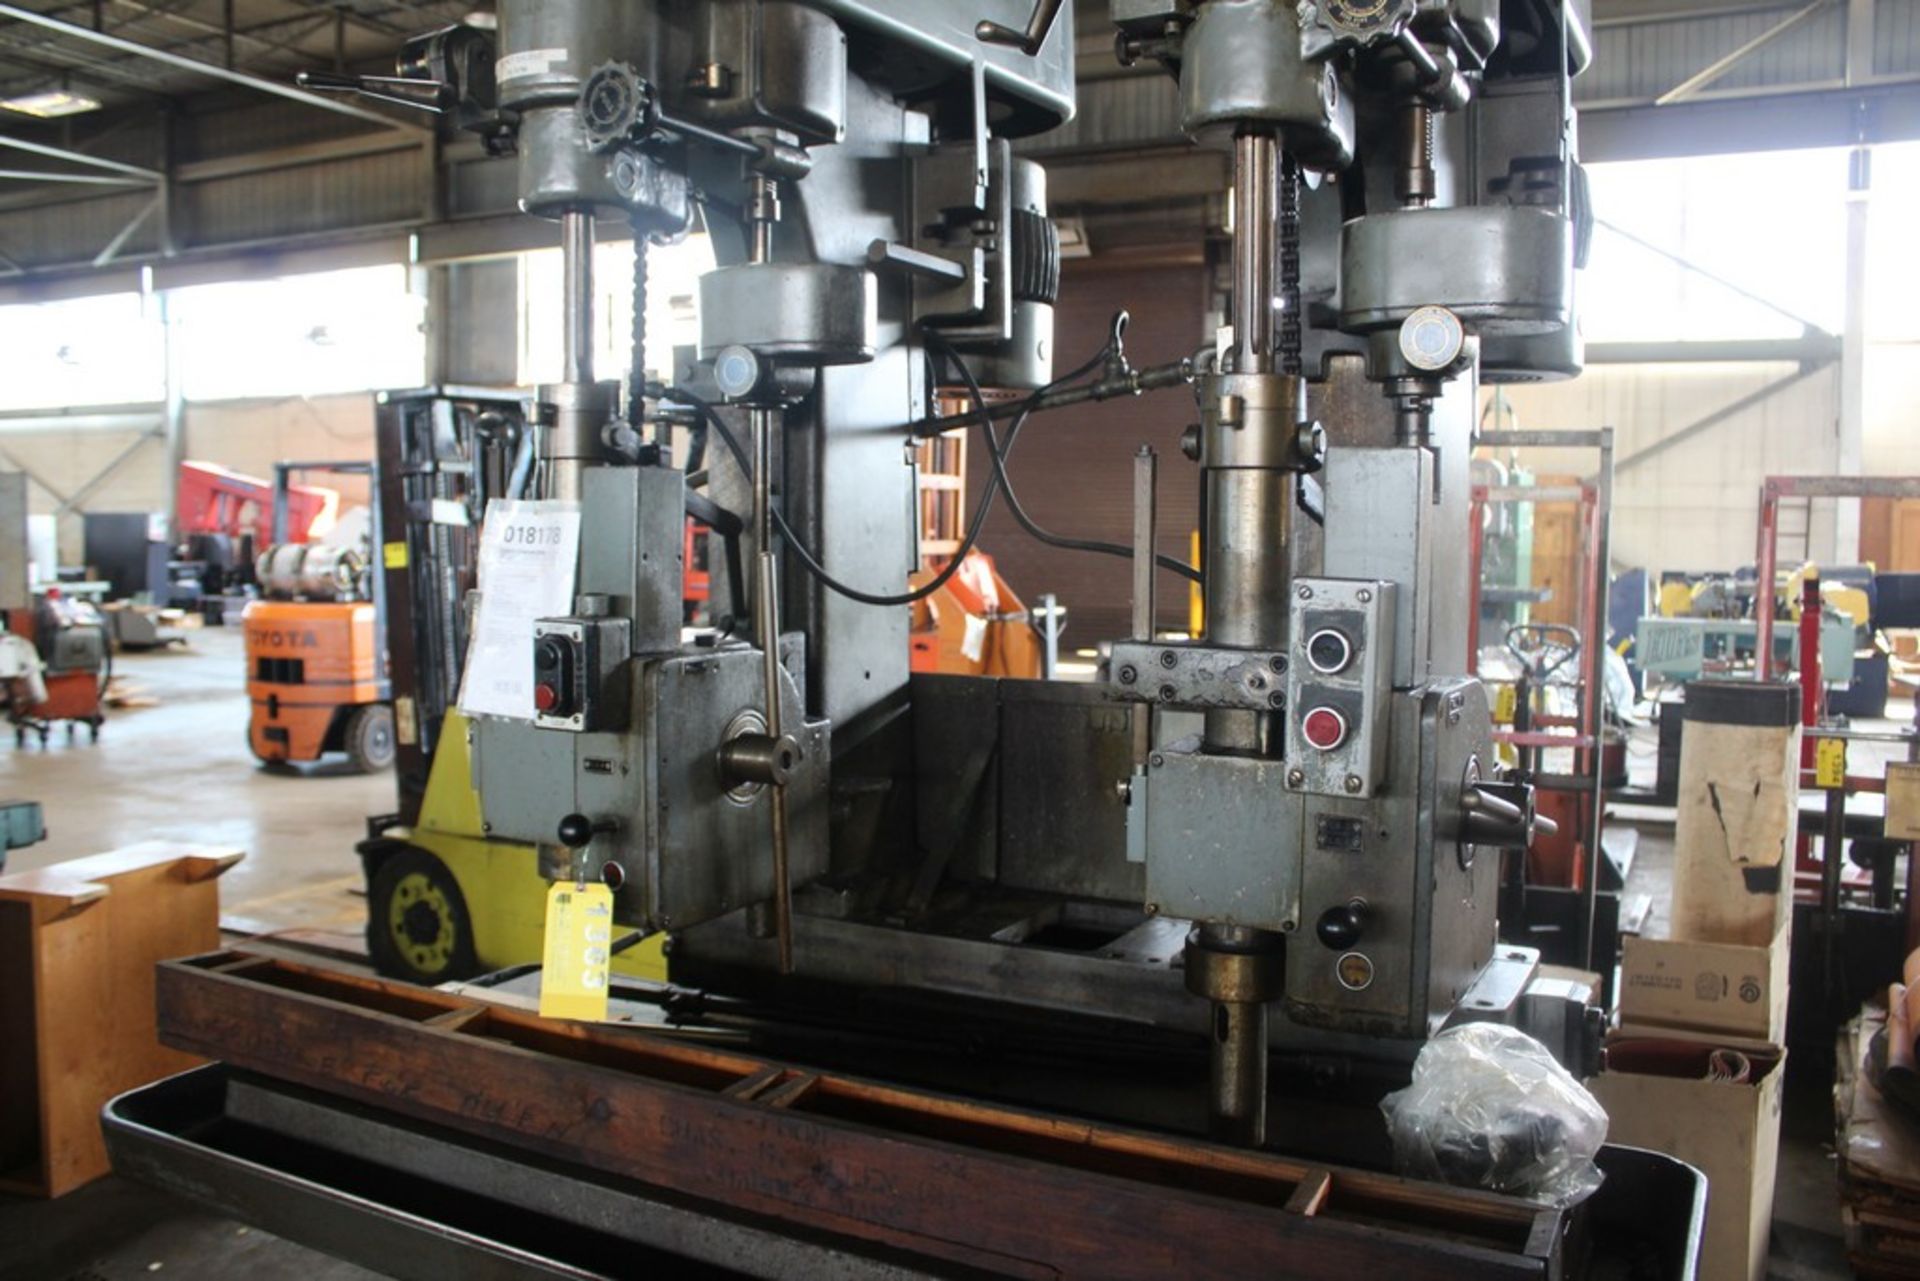 24" 2 SPINDLE ALLEN HEAVY DUTY DRILL PRESS, S/N 34405 (1974), ASSET # 18178 LOADING FEE: $100 - Image 3 of 4